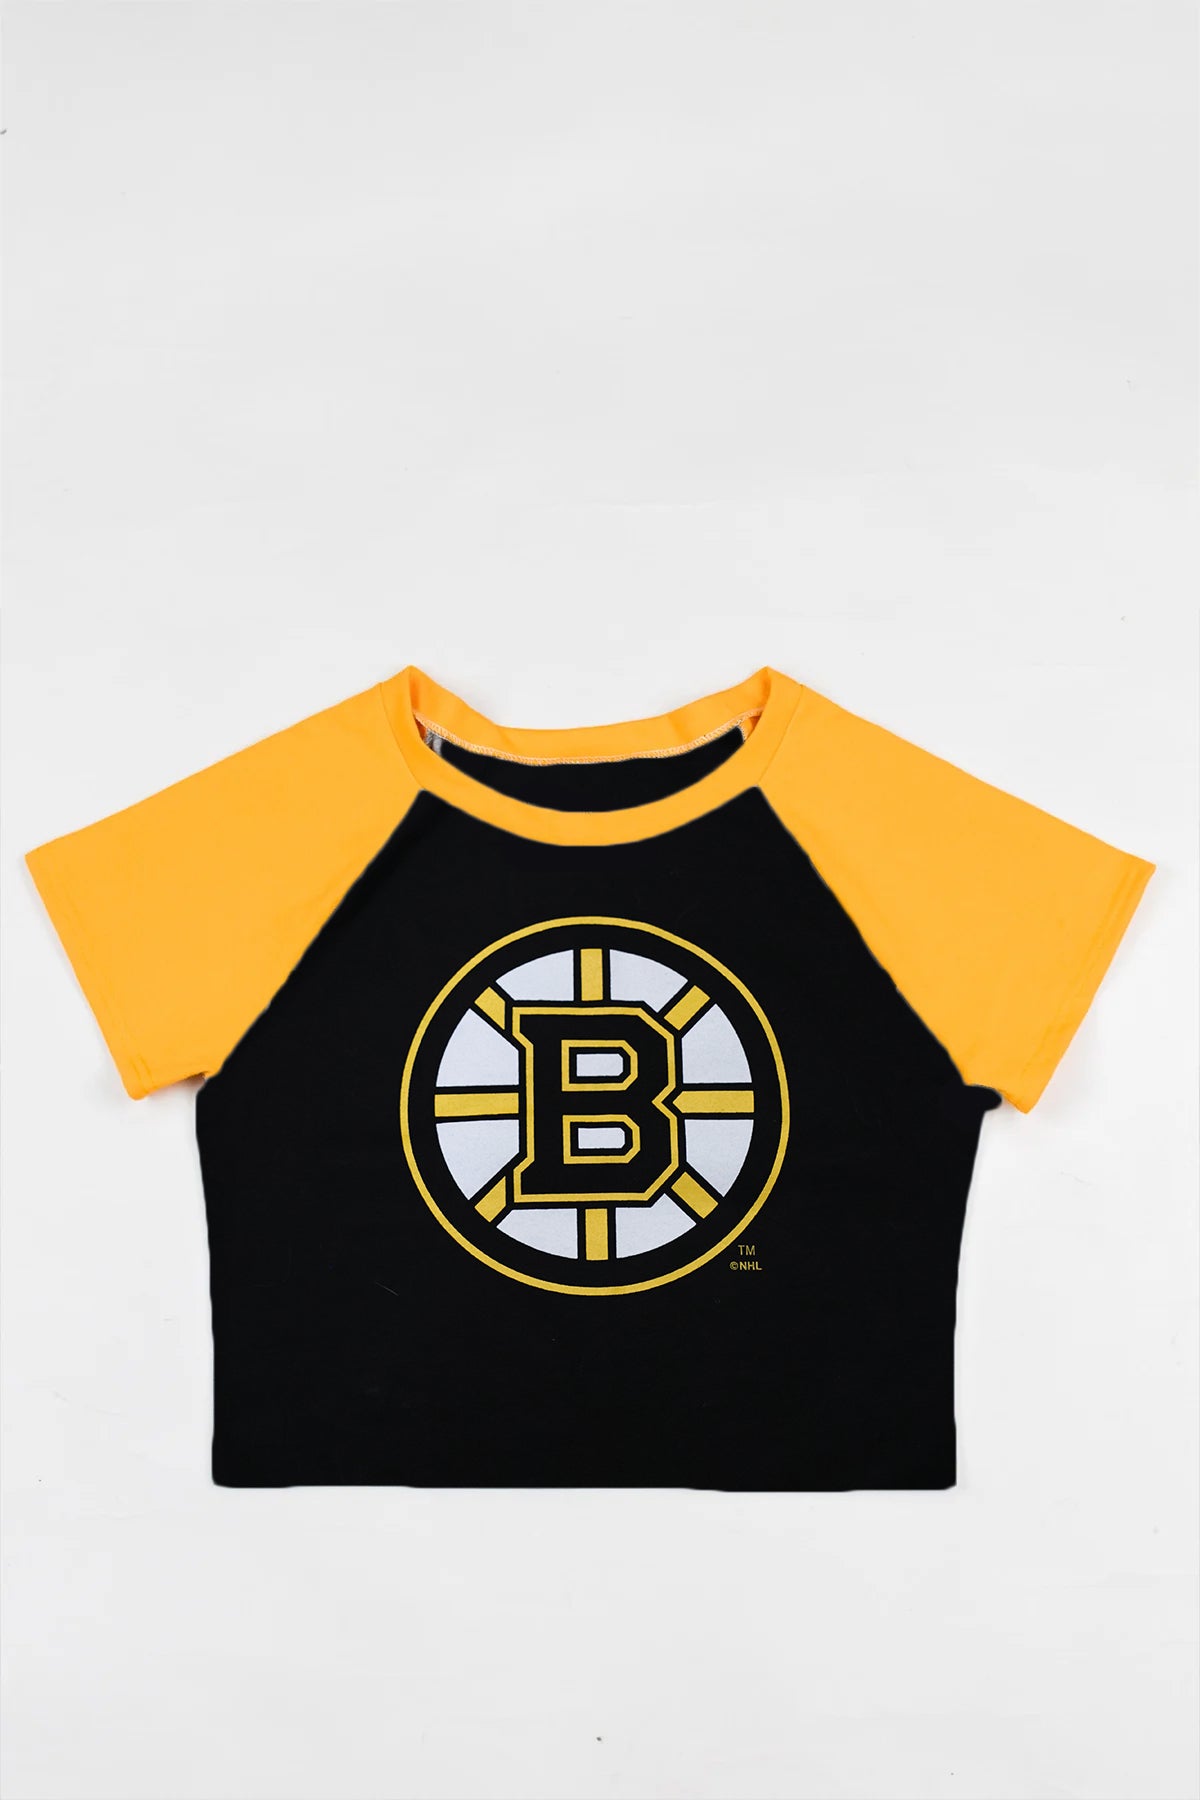 Upcycled Bruins Baby Tee - Made To Order